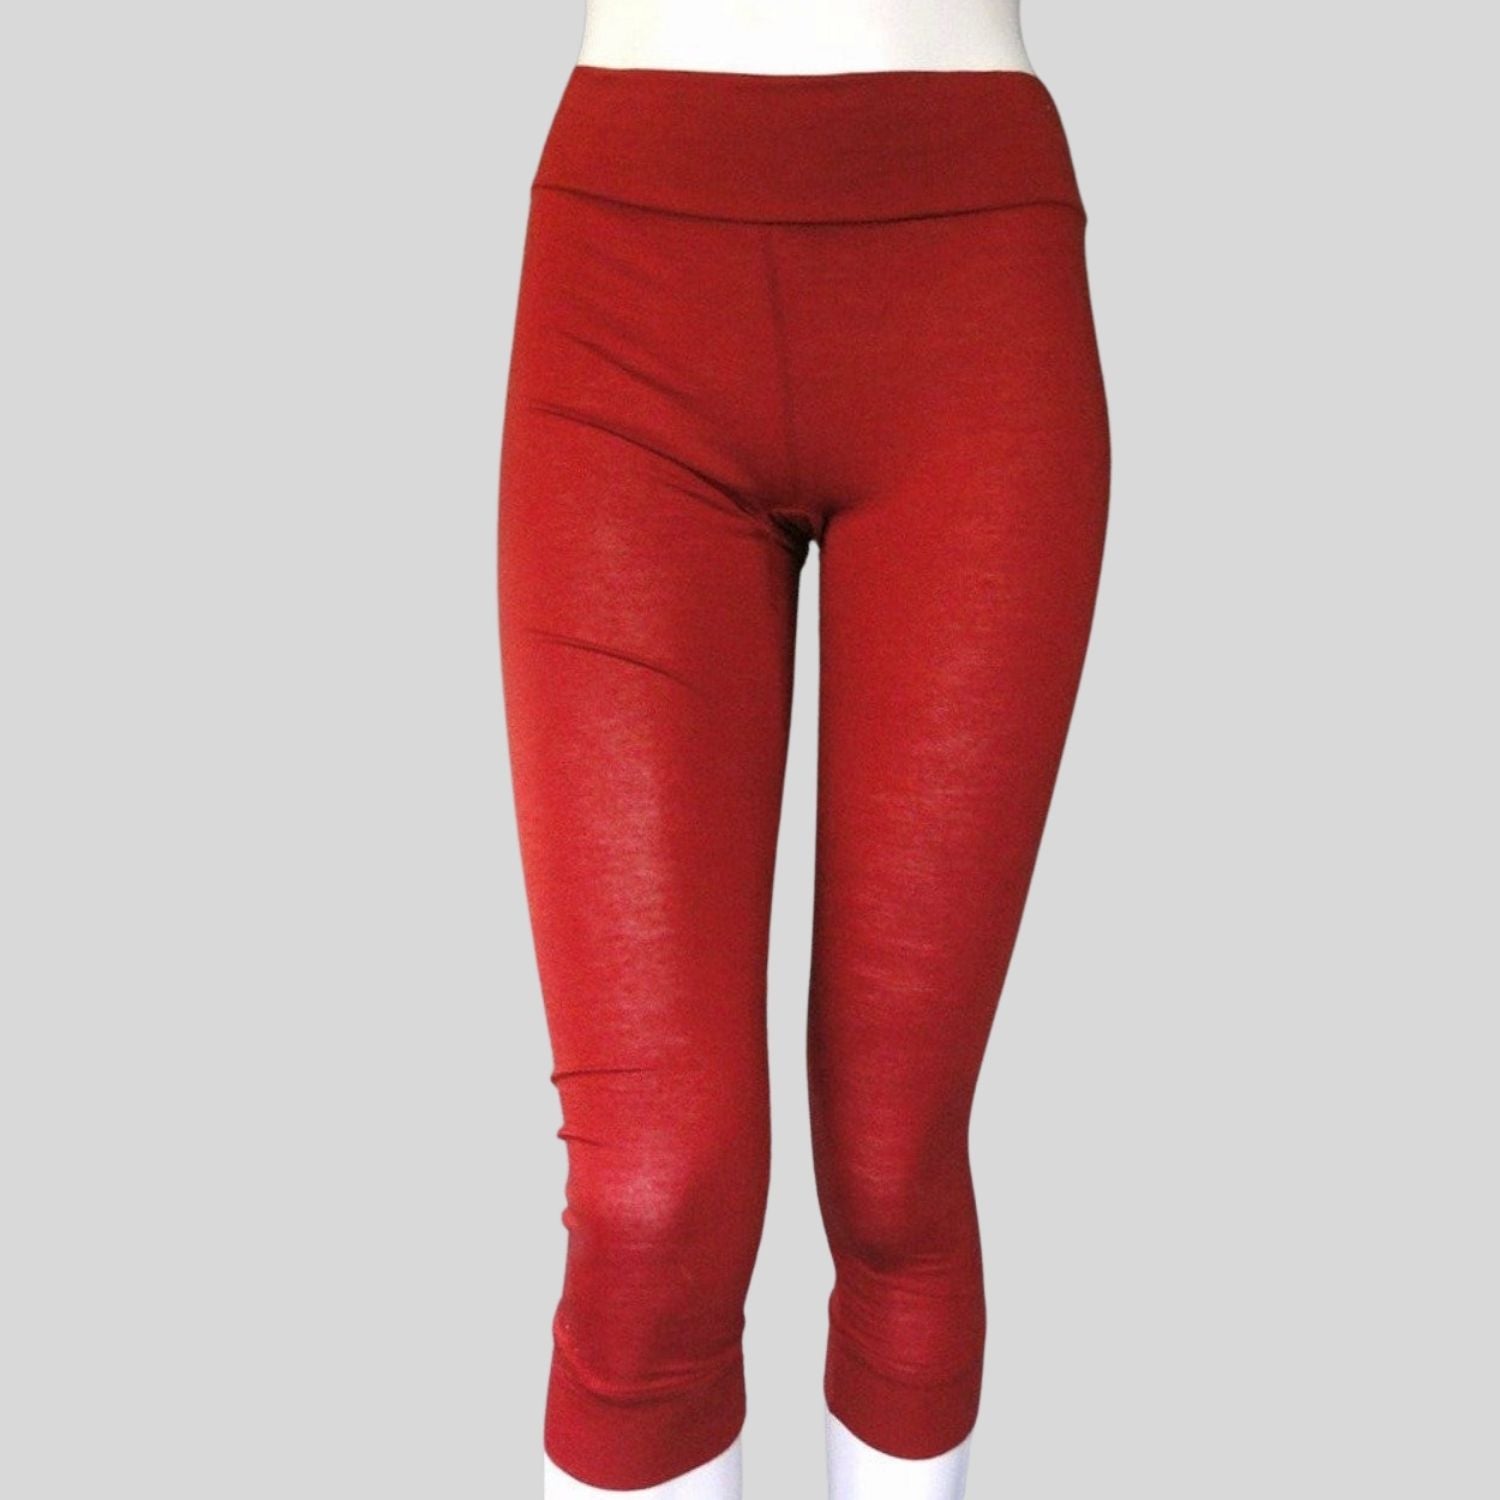 Merino wool women's leggings  Shop wool clothes for women from Canada –  econica